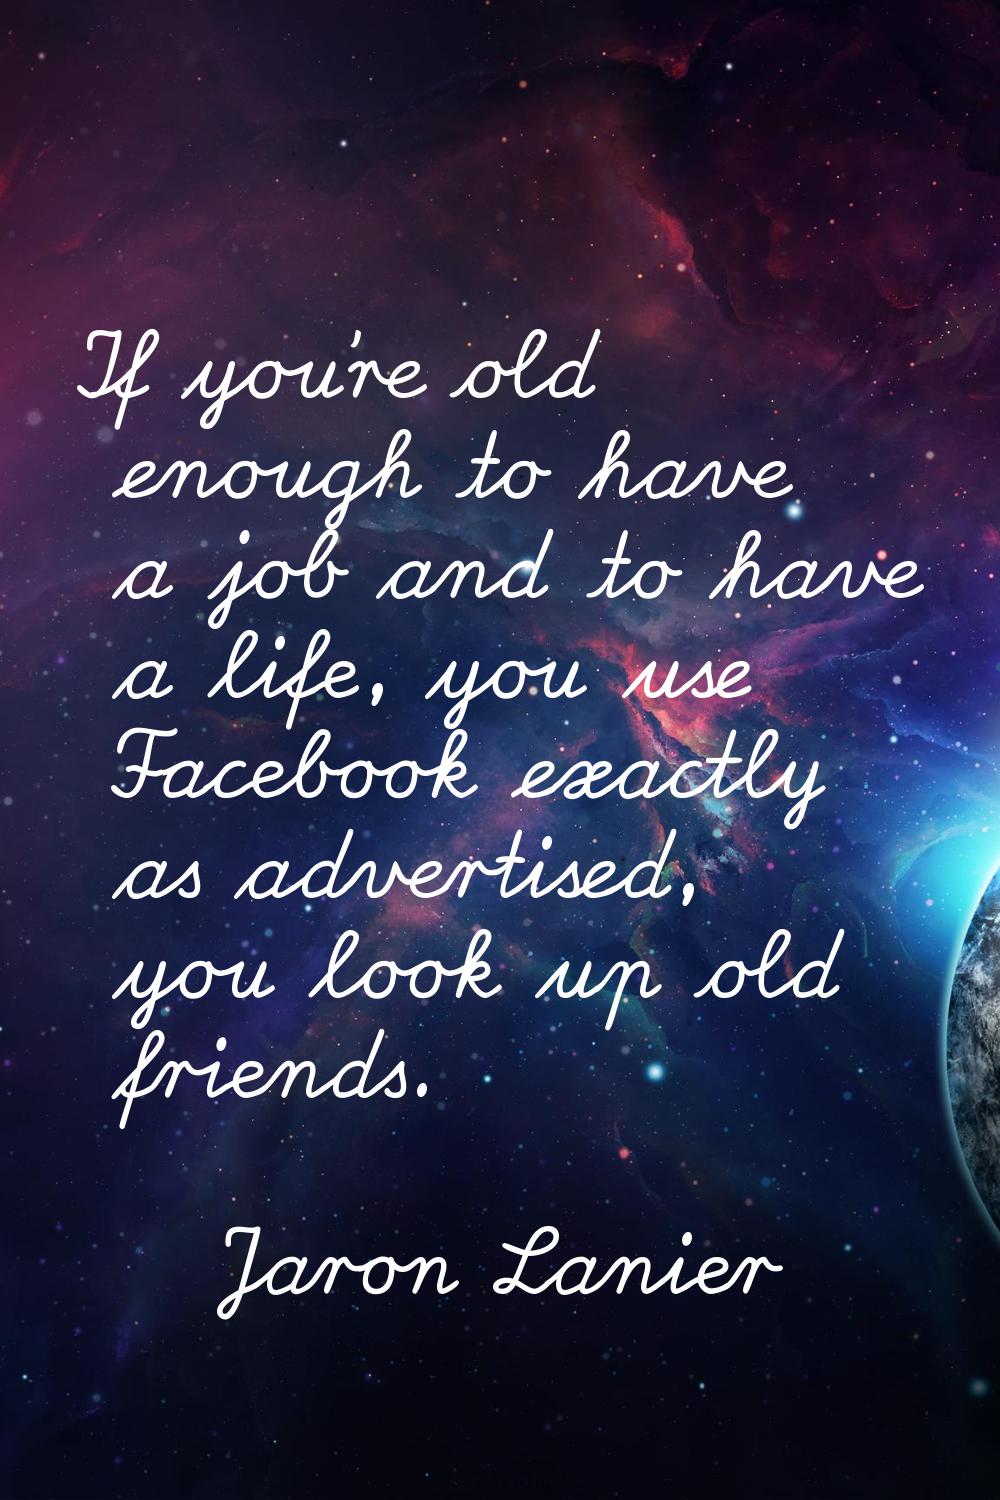 If you're old enough to have a job and to have a life, you use Facebook exactly as advertised, you 